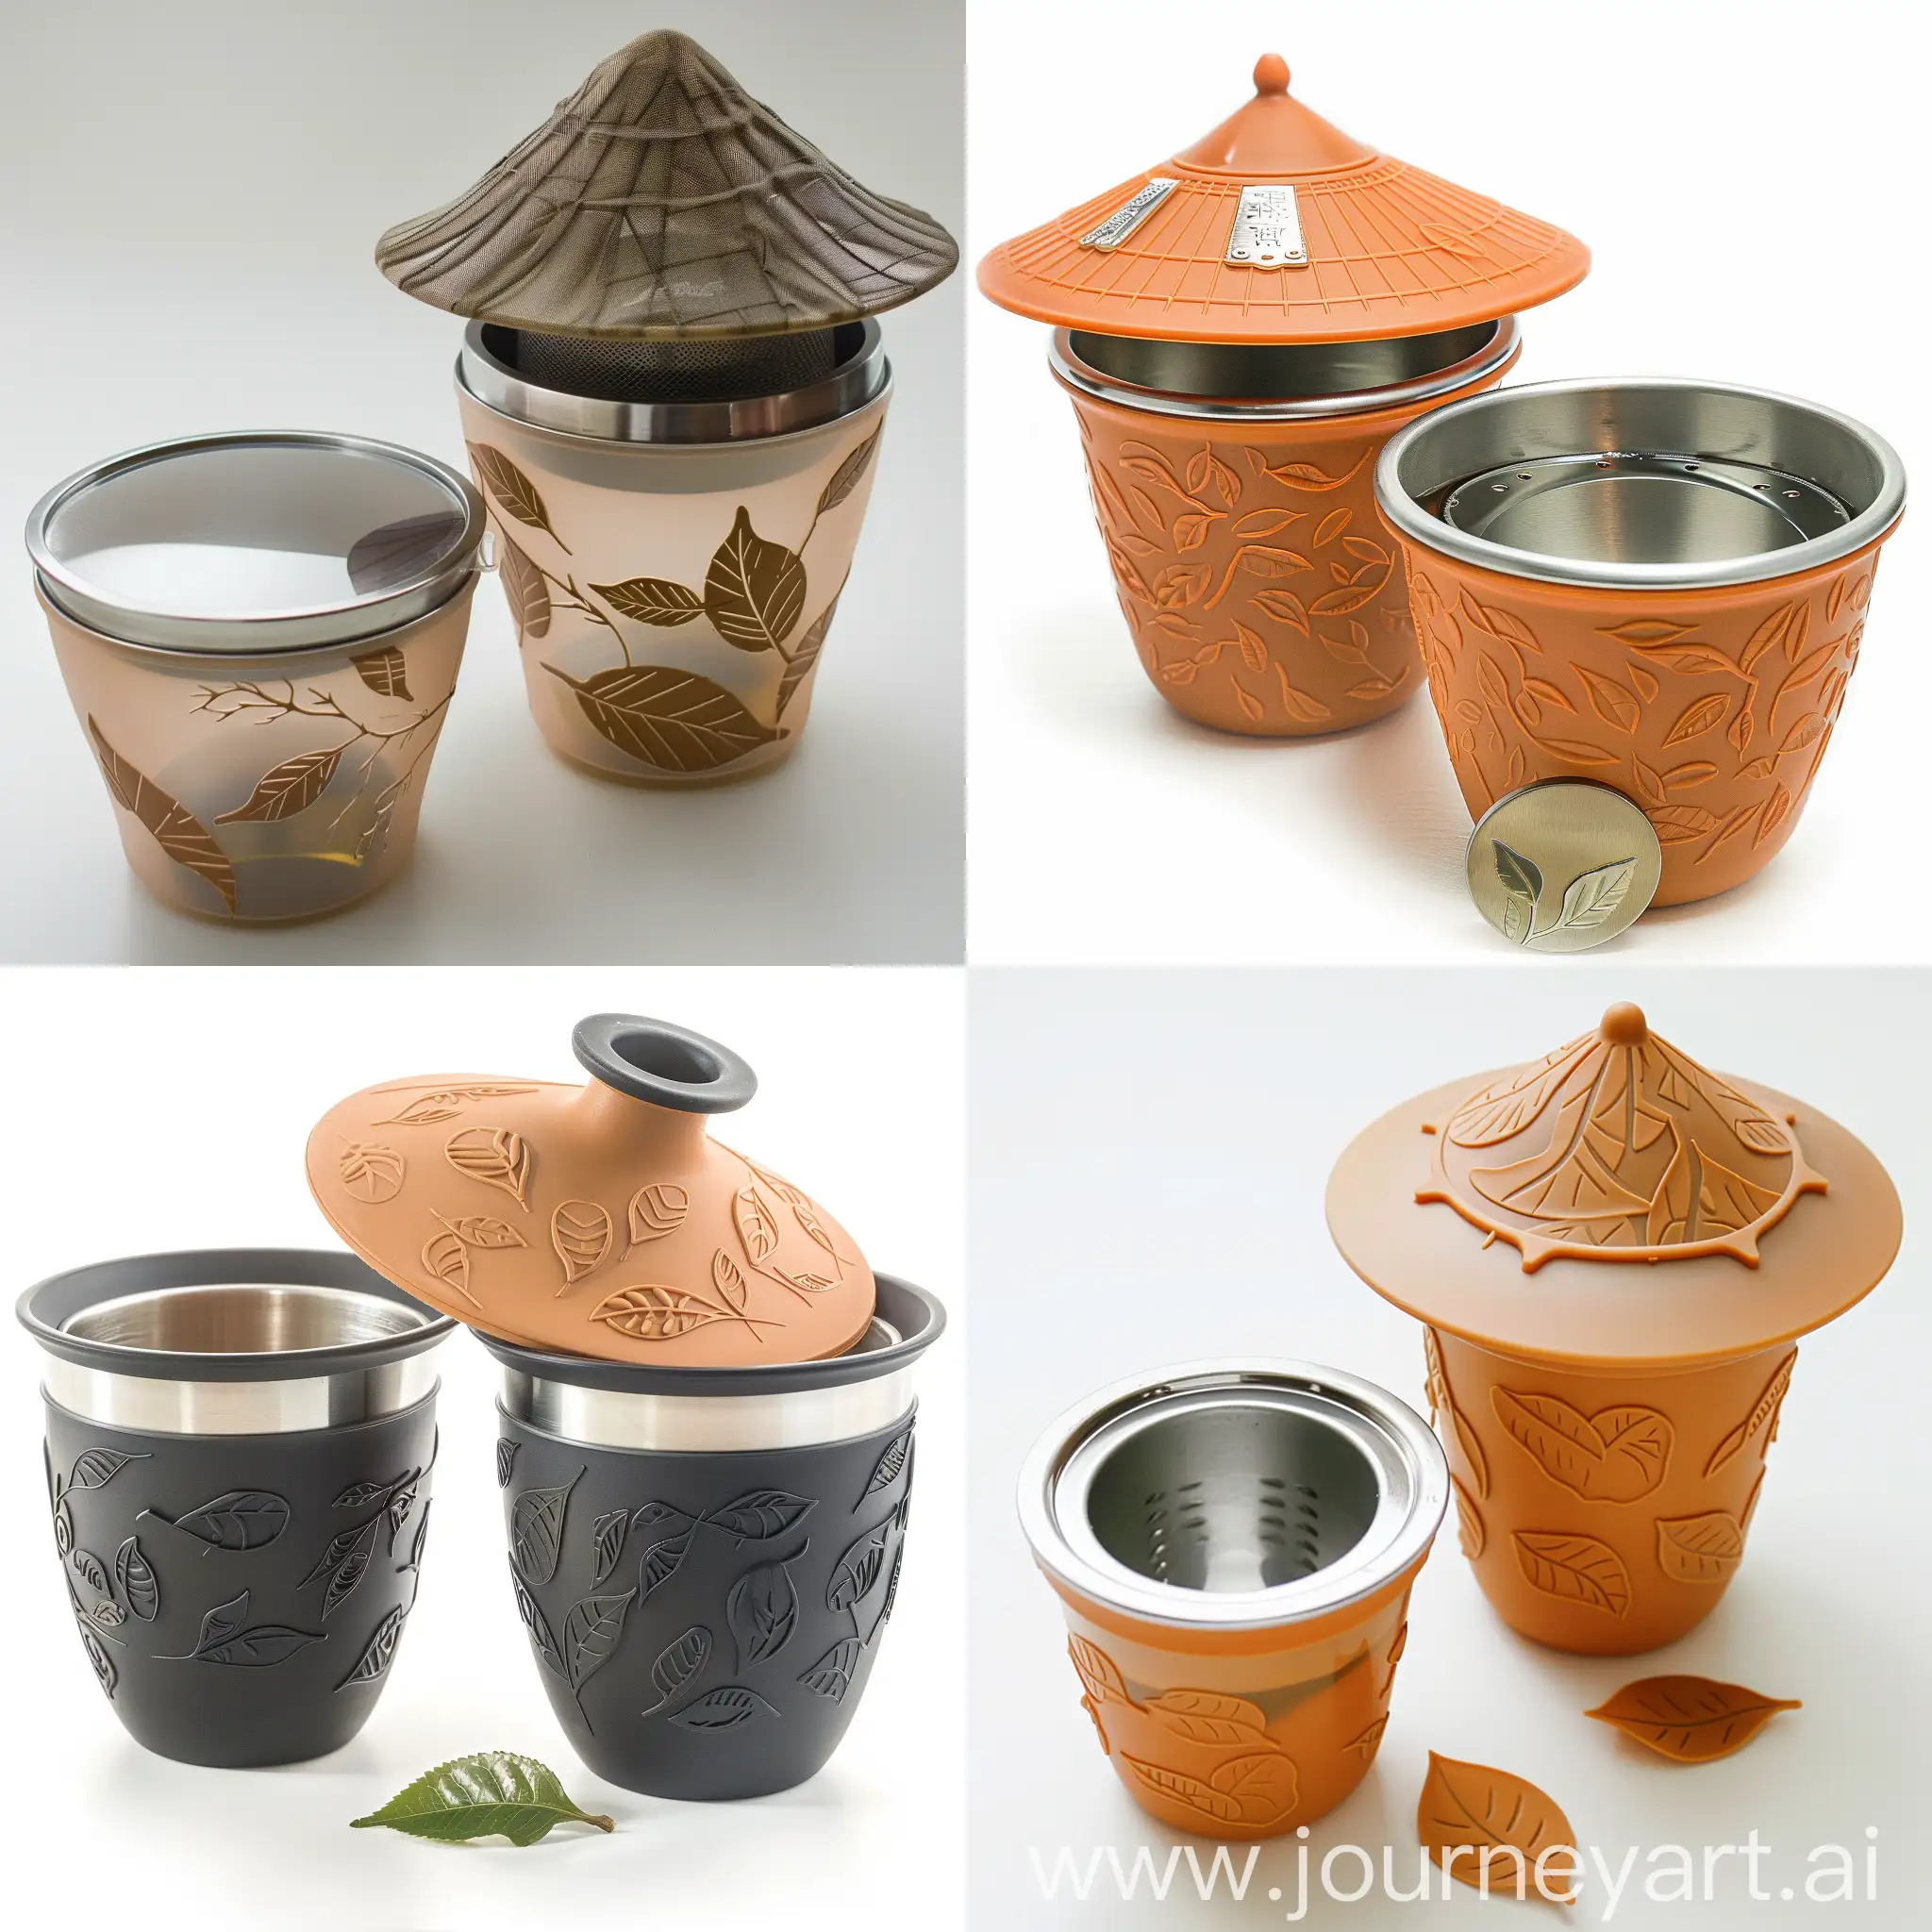 Quick Cup tea set, including two plastic cups with stainless steel inner lining, a lid shaped like a traditional Chinese hat, and the body of the Quick Cup featuring raised tea leaf patterns.